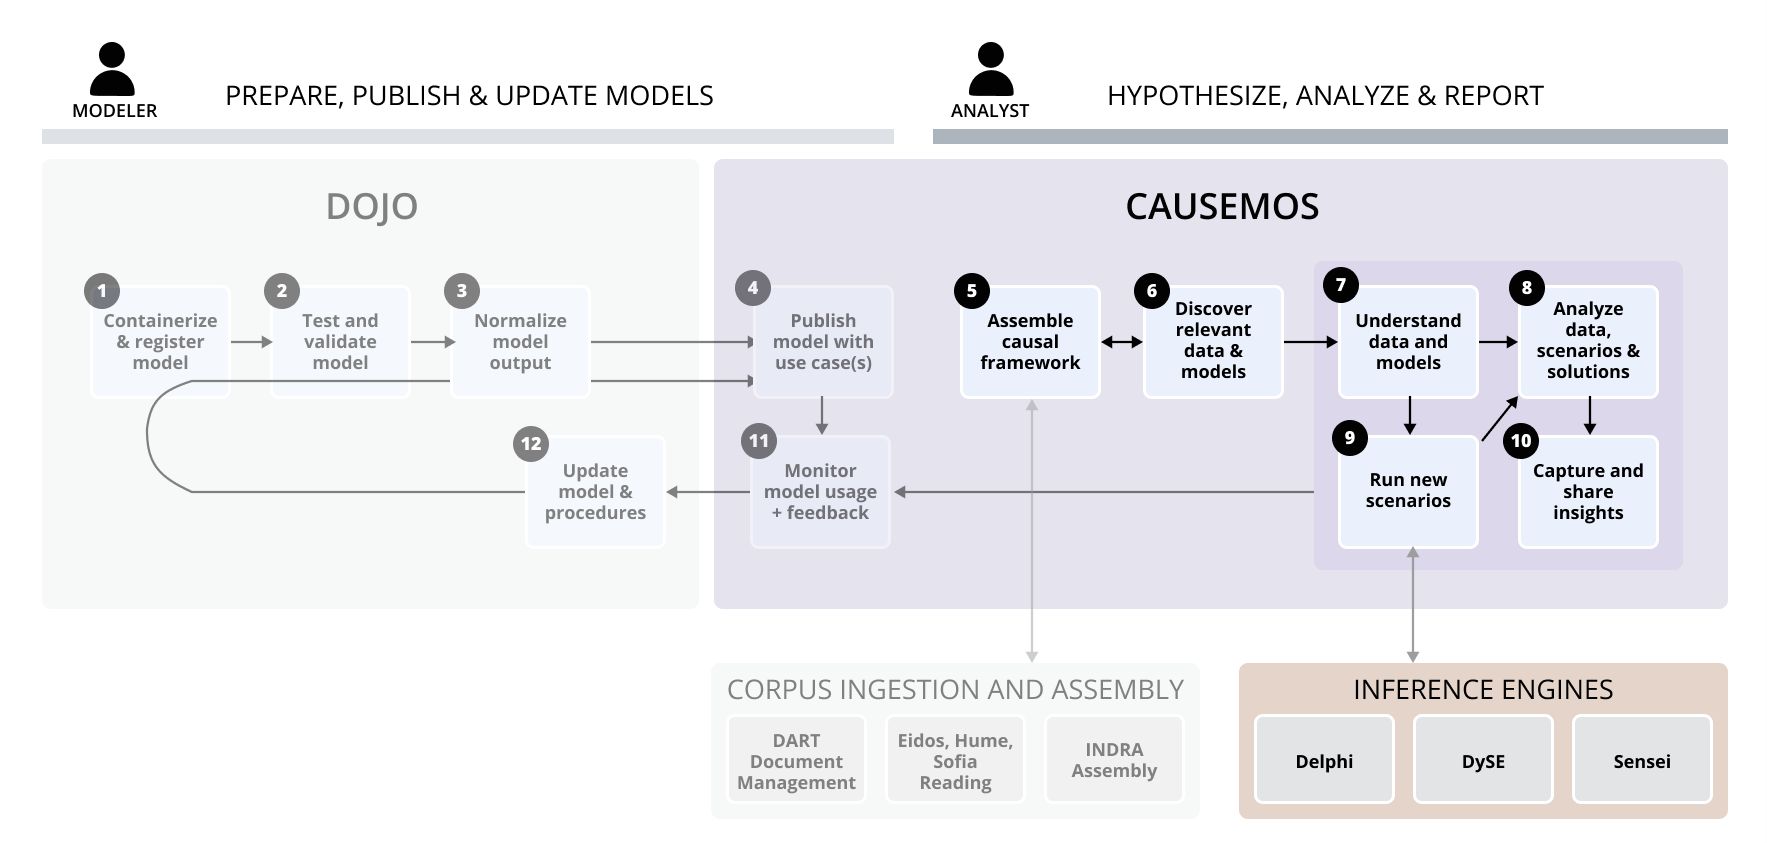 Qualitative analysis workflows supported by Causemos and the three inference engines, Delphi, DySE, and Sensei.